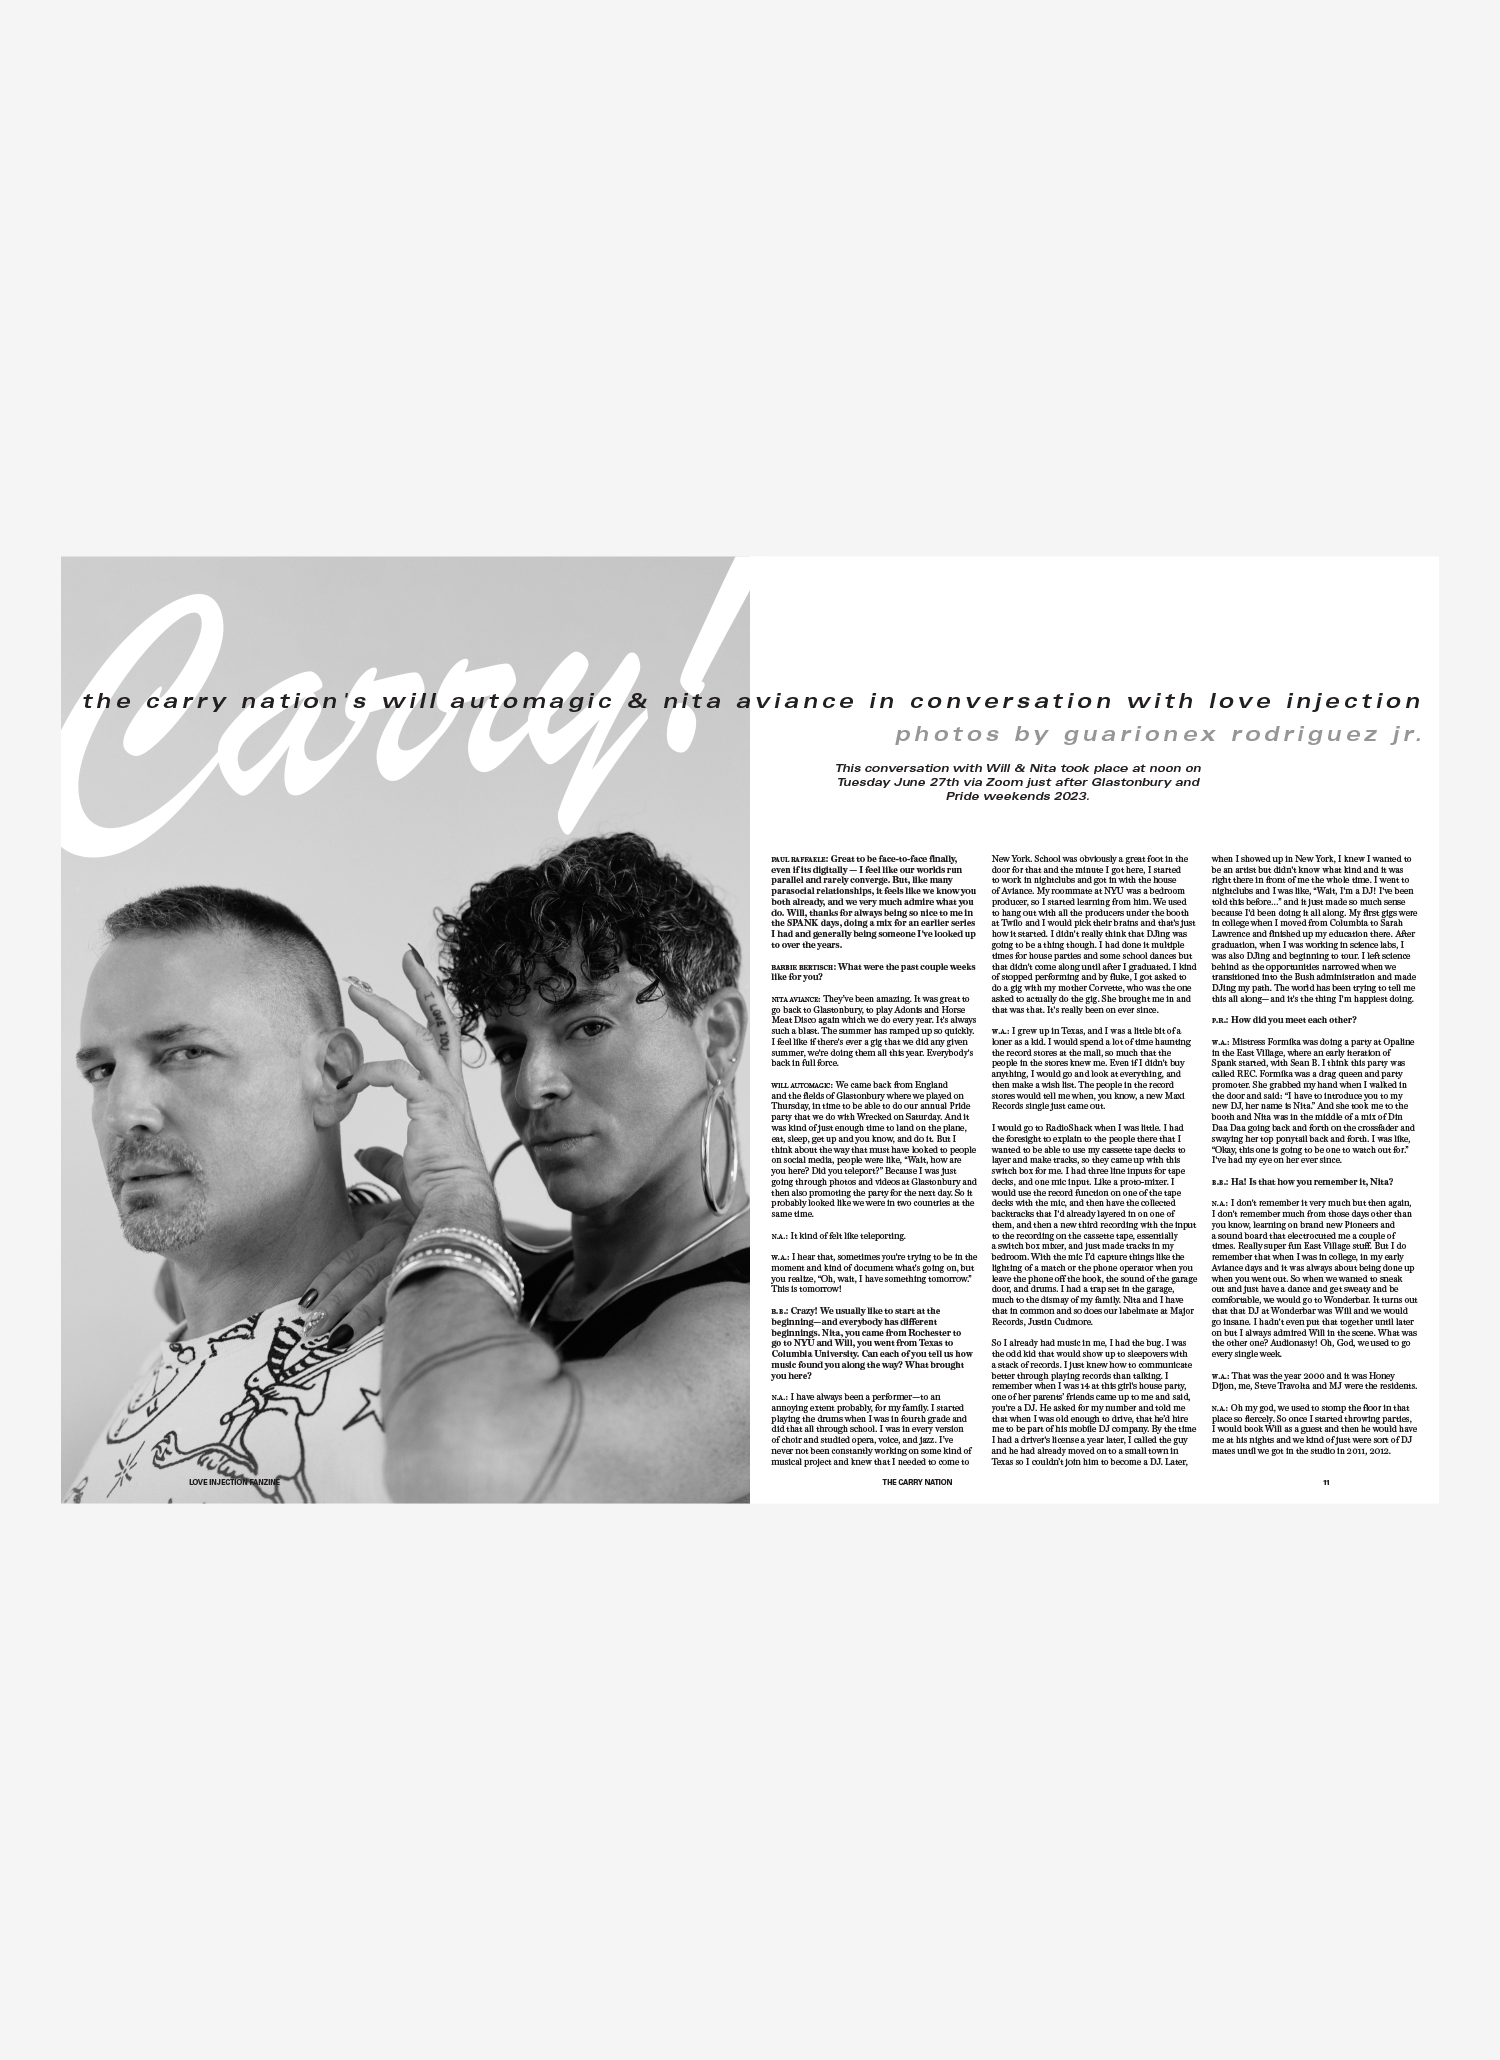 Love Injection Fanzine Issue 69 - The Carry Nation